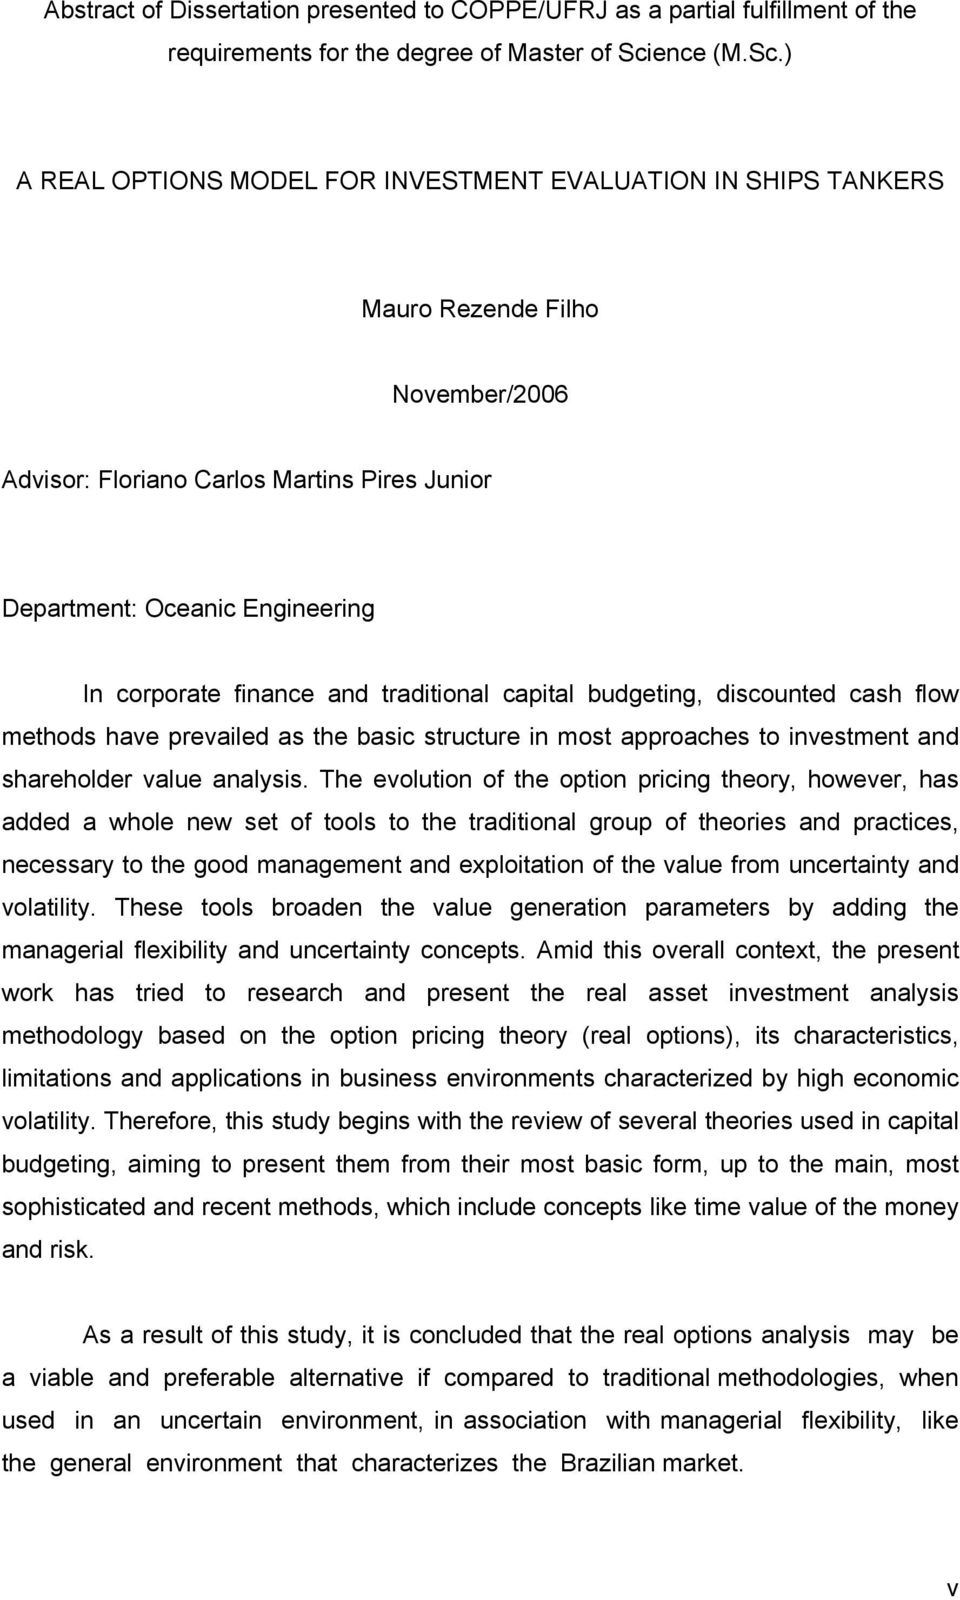 A REAL OPTIONS MODEL FOR INVESTMENT EVALUATION IN SHIPS TANKERS Mauro Rezende Filho November/6 Advisor: Floriano Carlos Marins Pires Junior Deparmen: Oceanic Engineering In corporae finance and